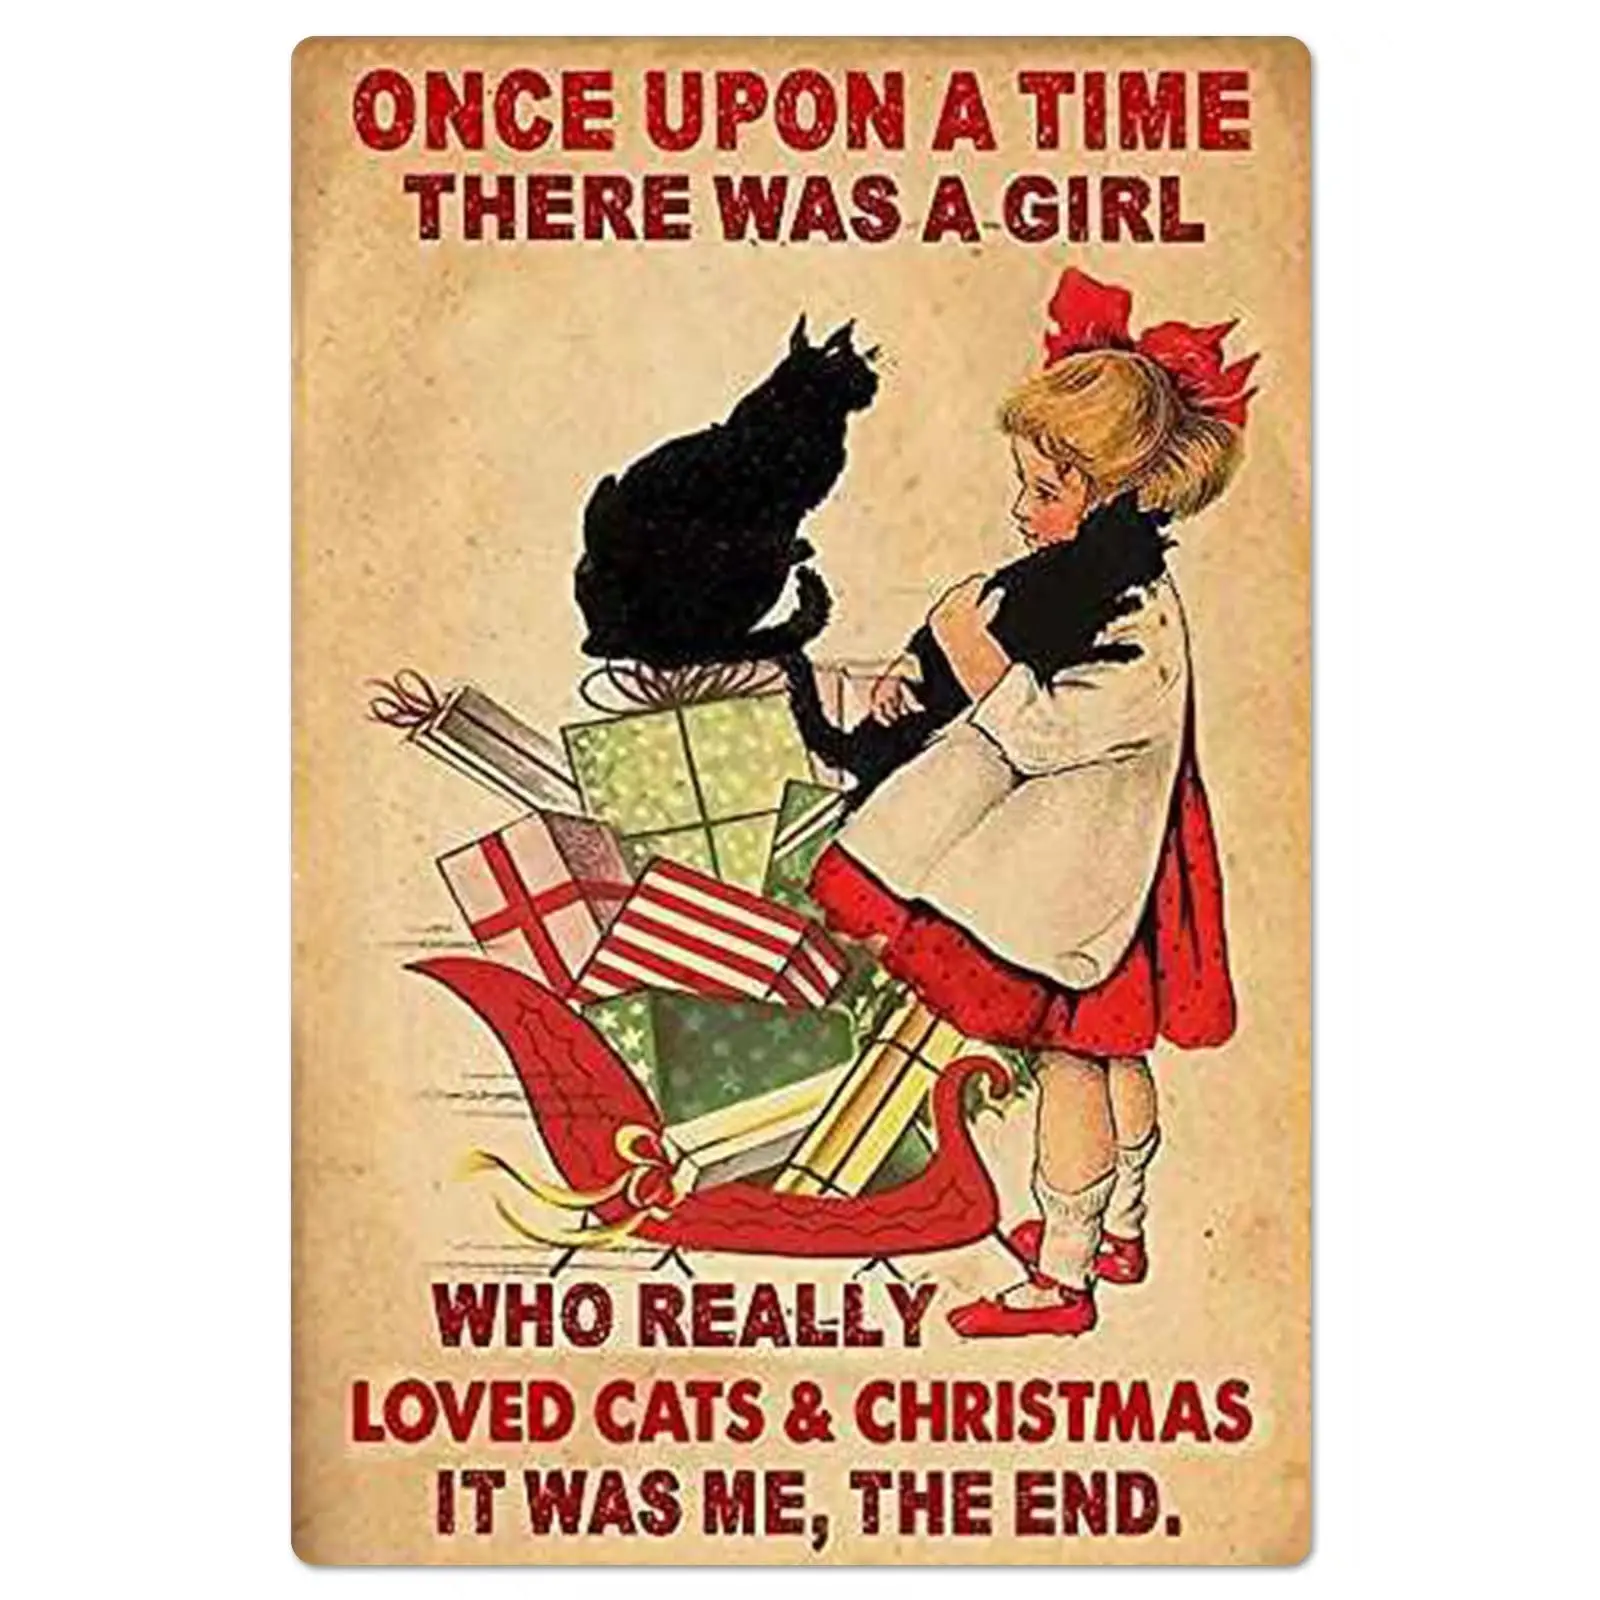 

Vintage metal Board Hanging Once Upon A Time There Was A Girl Who Really Loved Cats & Christmas It Was Me Poster Bar Home Ca